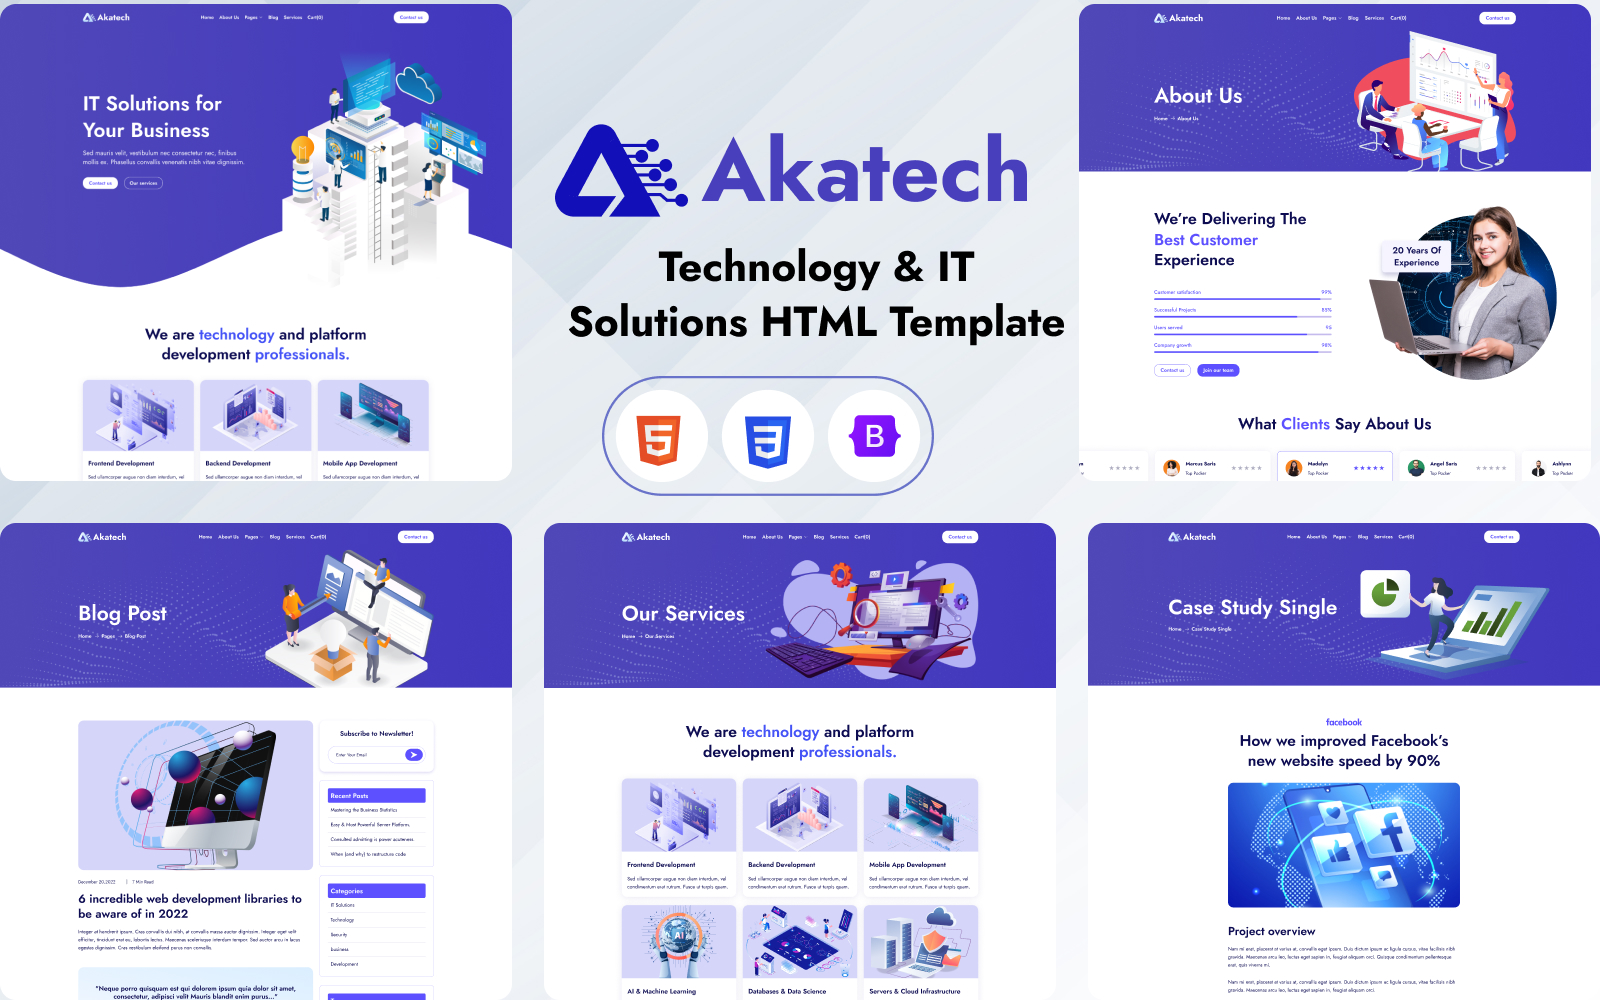 Akatech - Technology & IT Solutions HTML Template